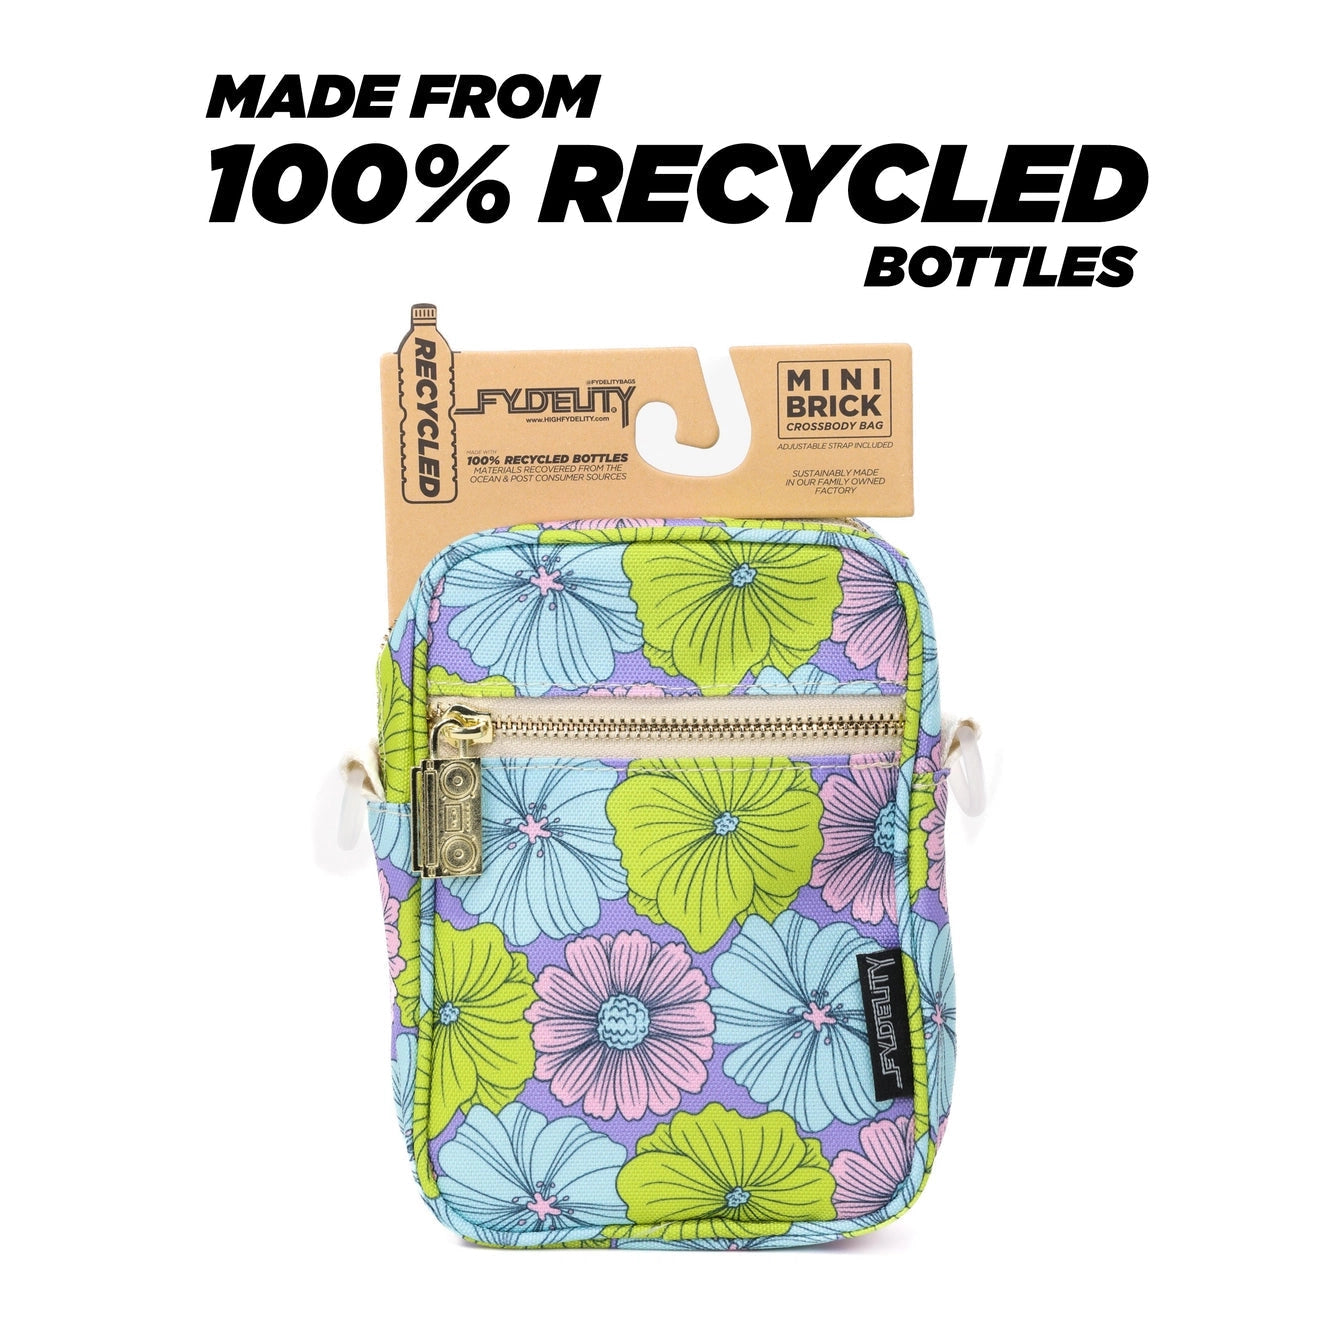 Floral '70s Crossbody Mini Brick Bag | Made of 100% Recycled Bottles